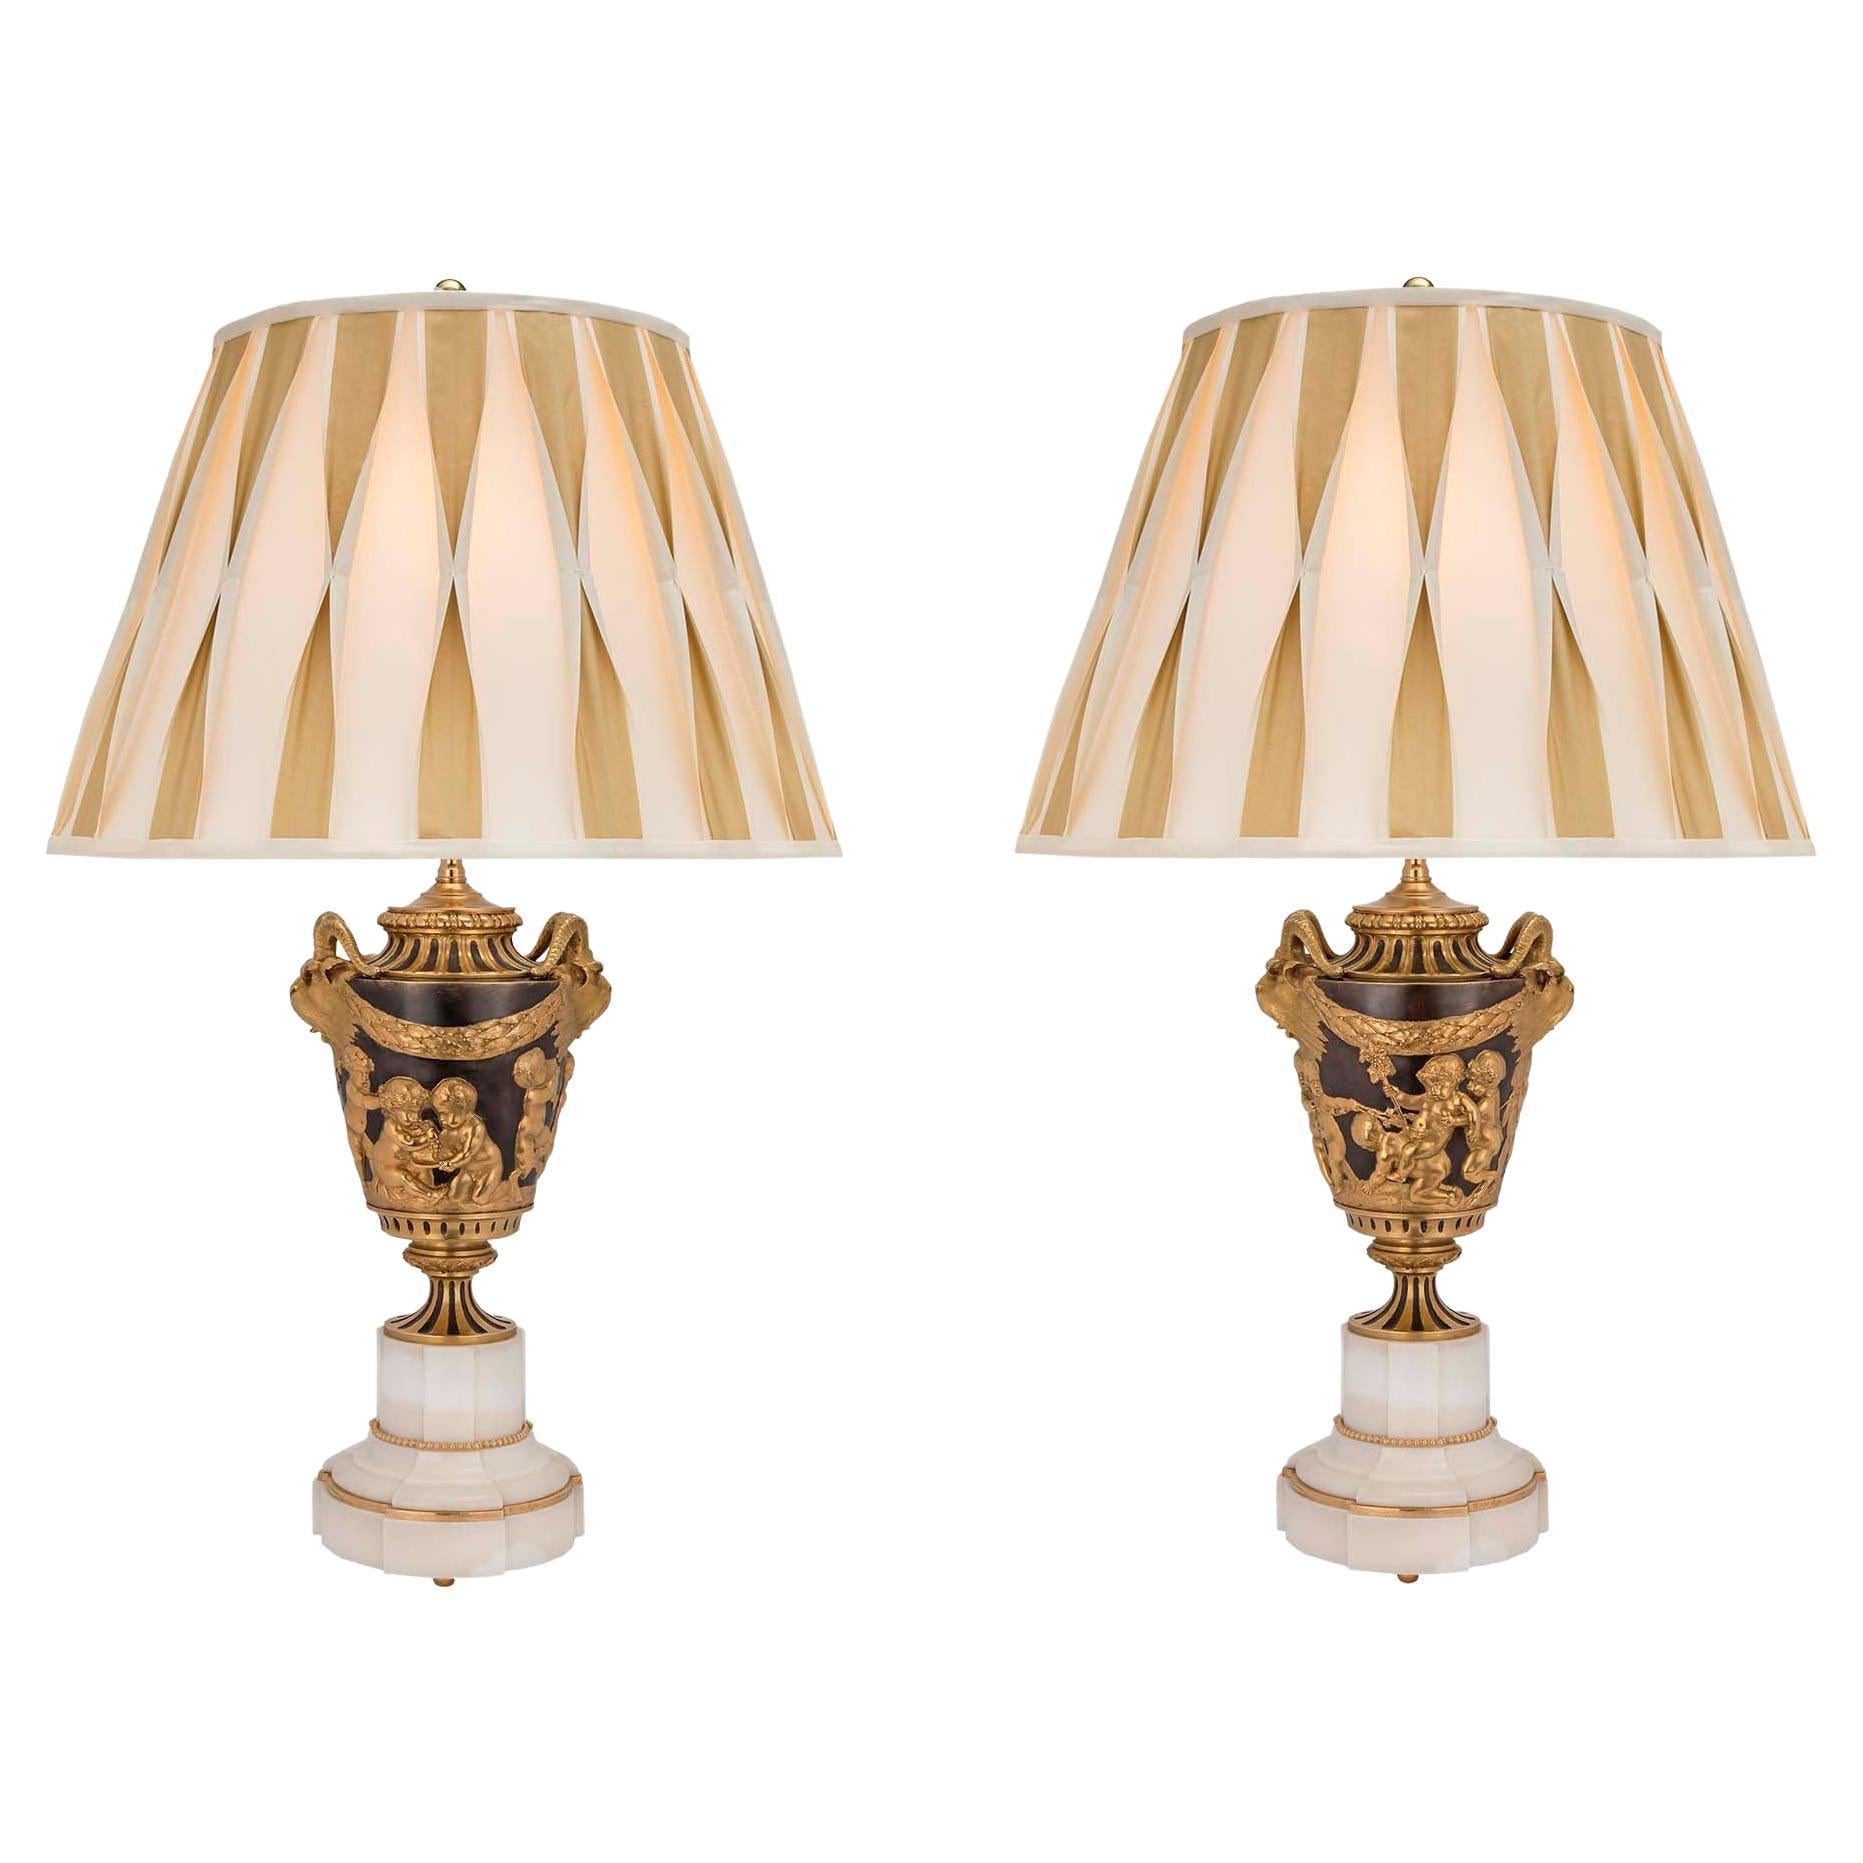 Pair of French 19th Century Louis XVI Style Patinated Bronze and Ormolu Lamps